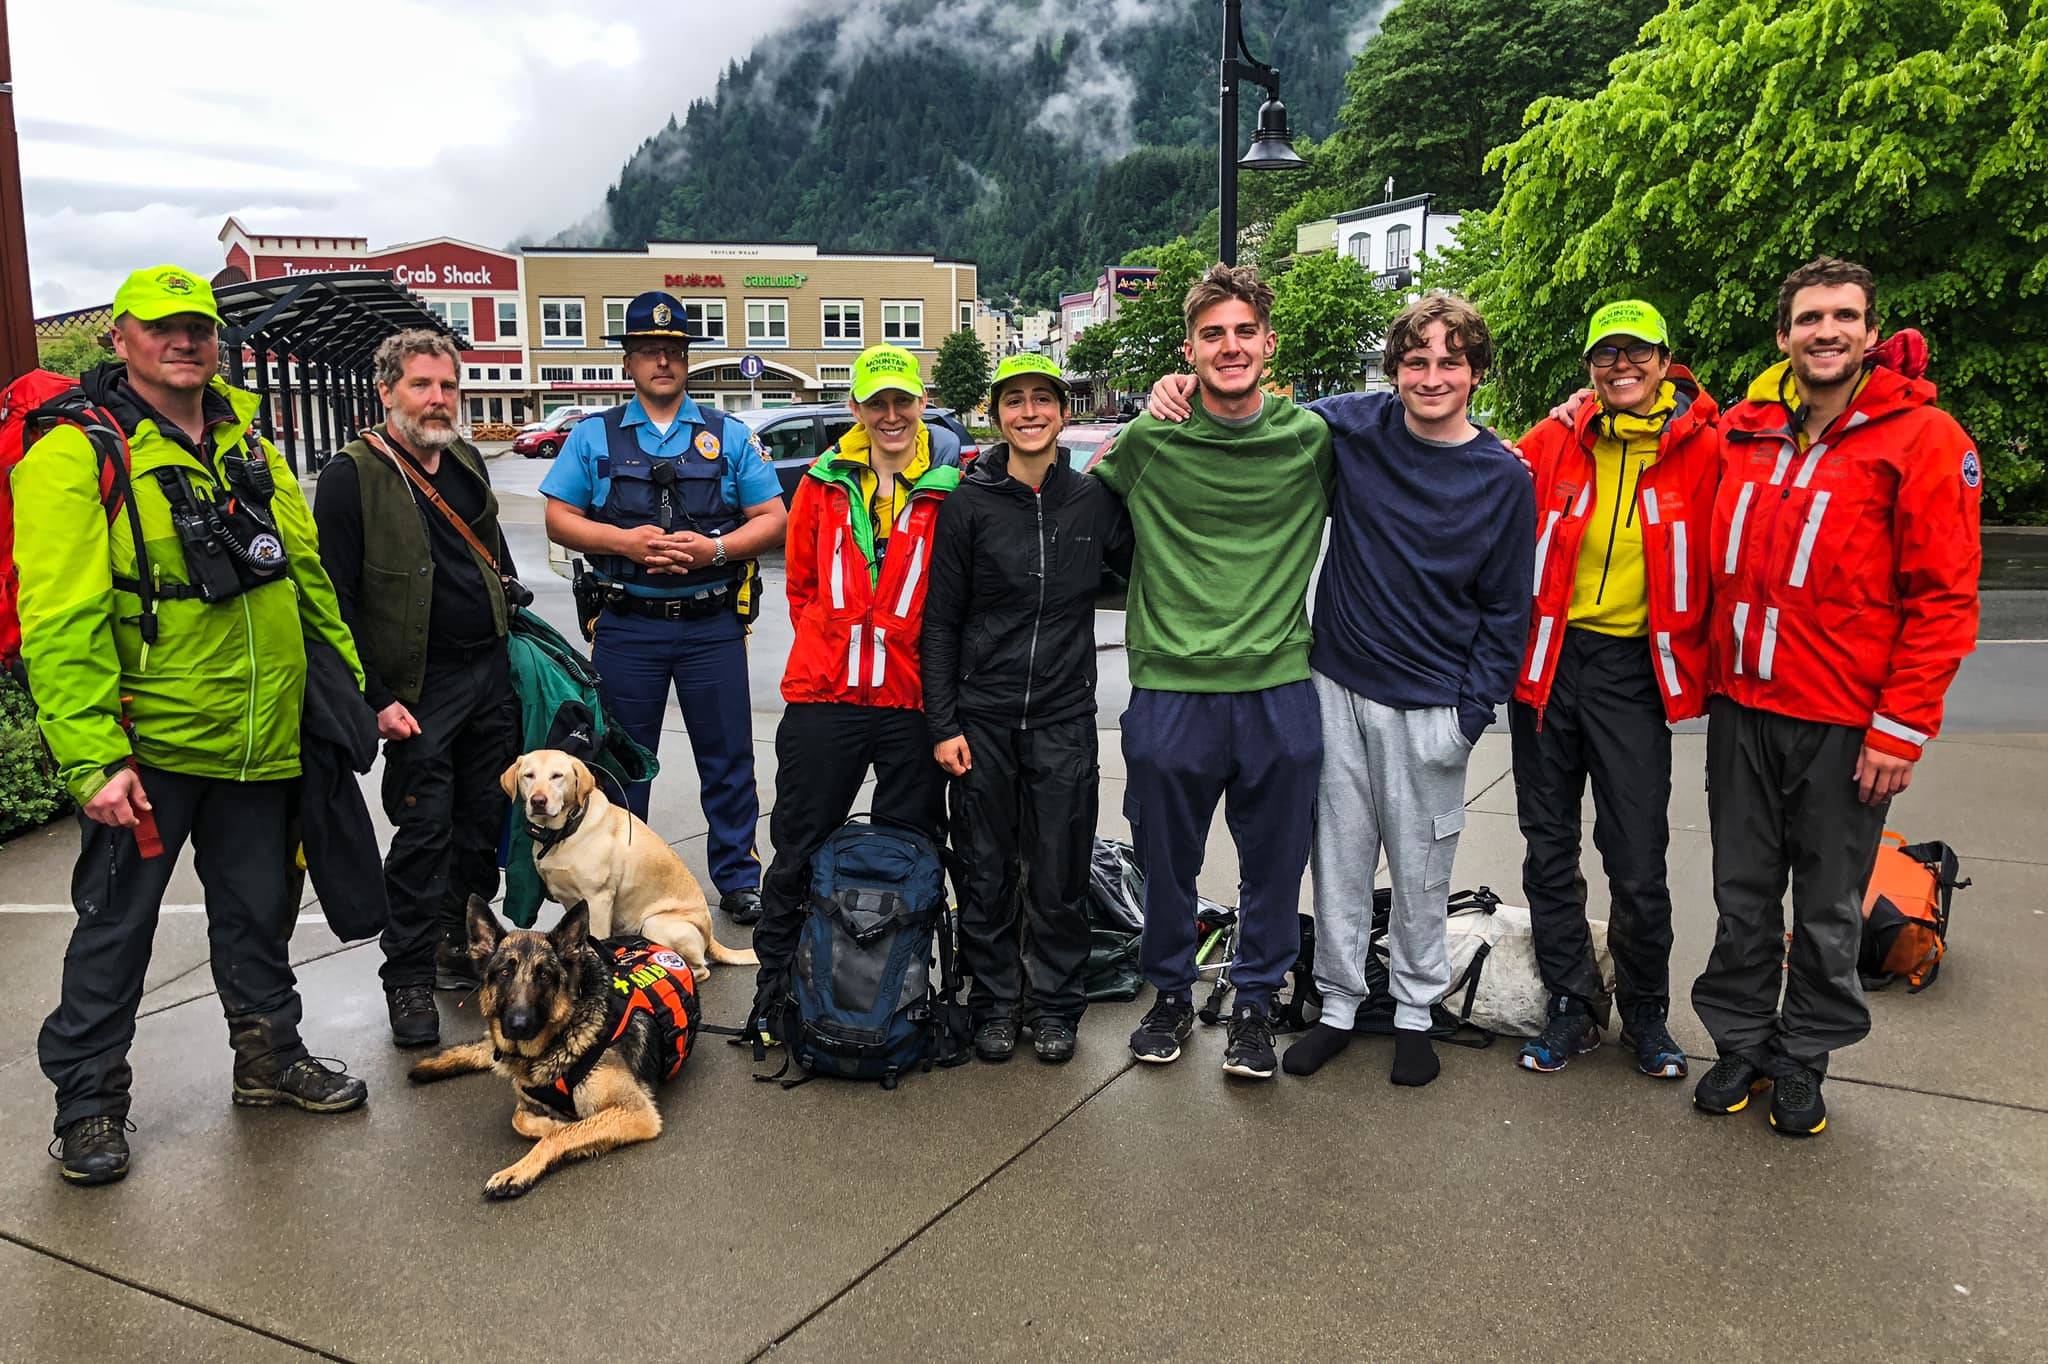 Courtesy photo / Juneau Mountain Rescue
Two hikers, third and fourth from the right, were rescued after being stranded on Mount Roberts Wednesday evening by rapidly changing weather.